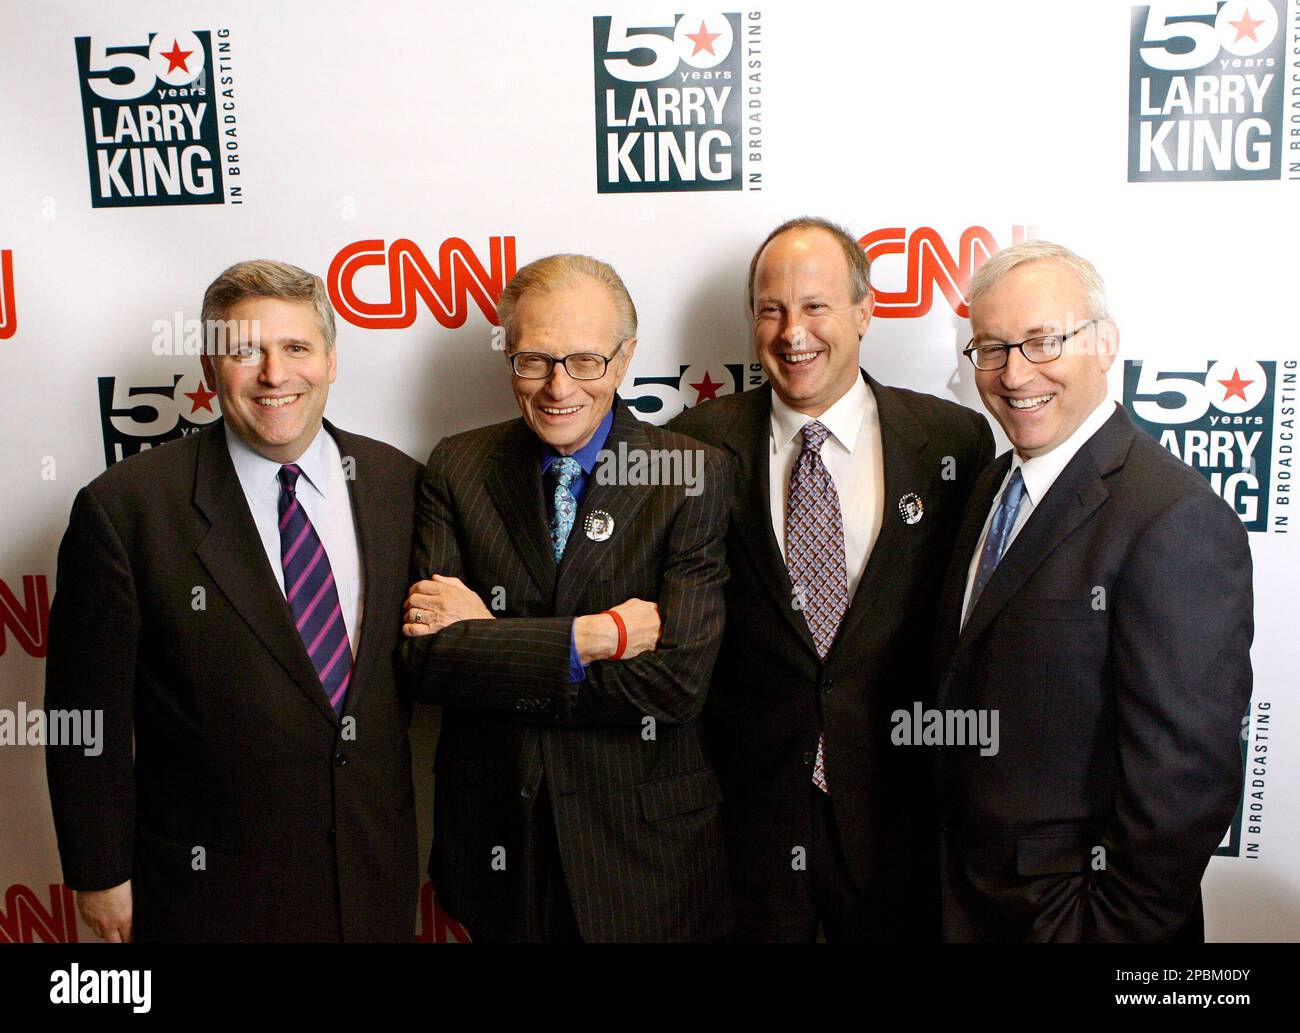 from left to right philip kent chairman and ceo of turner broadcasting system inc larry king jim walton president of cnn worldwide and jon klein president of cnnus stand together at a party held by cnn celebrating kings fifty years of broadcasting new york wednesday april 18 2007 ap photostuart ramson 2PBM0DY